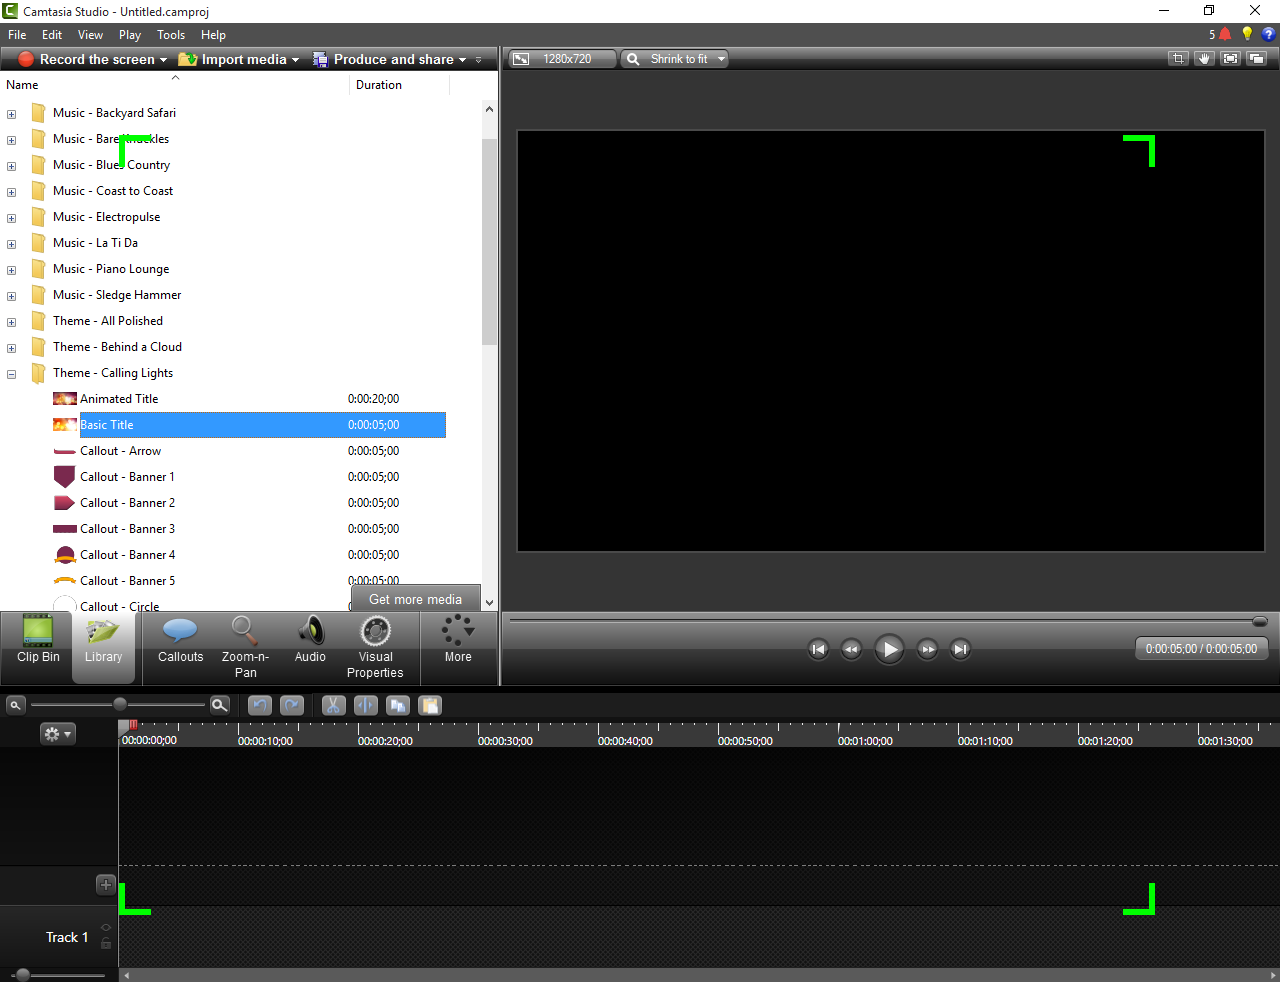 how to download camtasia studio 8 for free full version